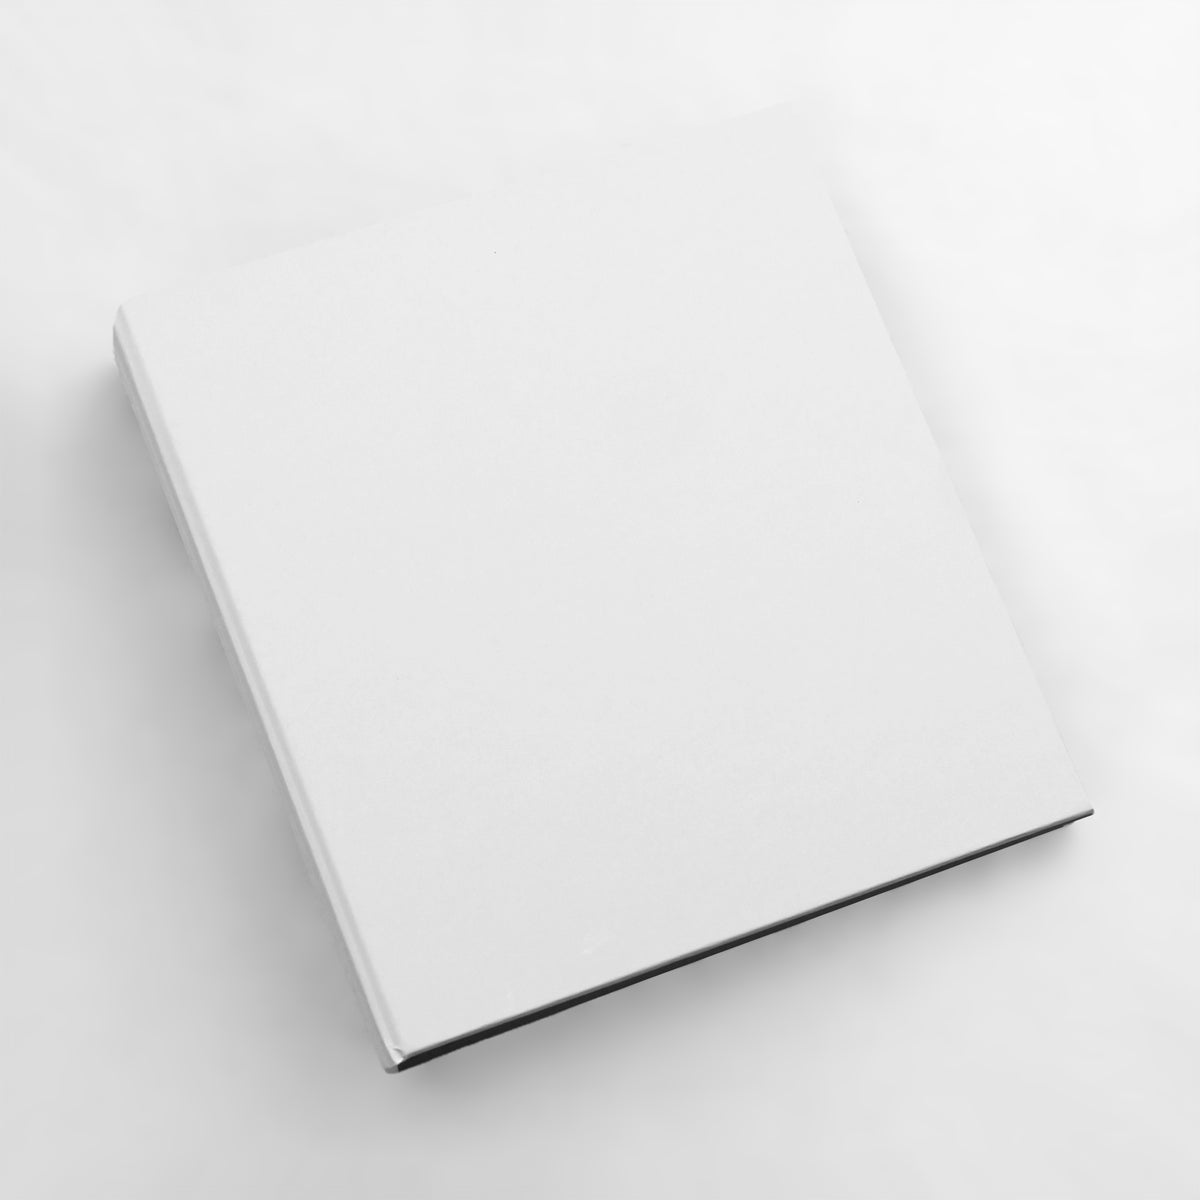 Medium Photo Binder For 4x6 Photos | Cover: White Vegan Leather | Available Personalized